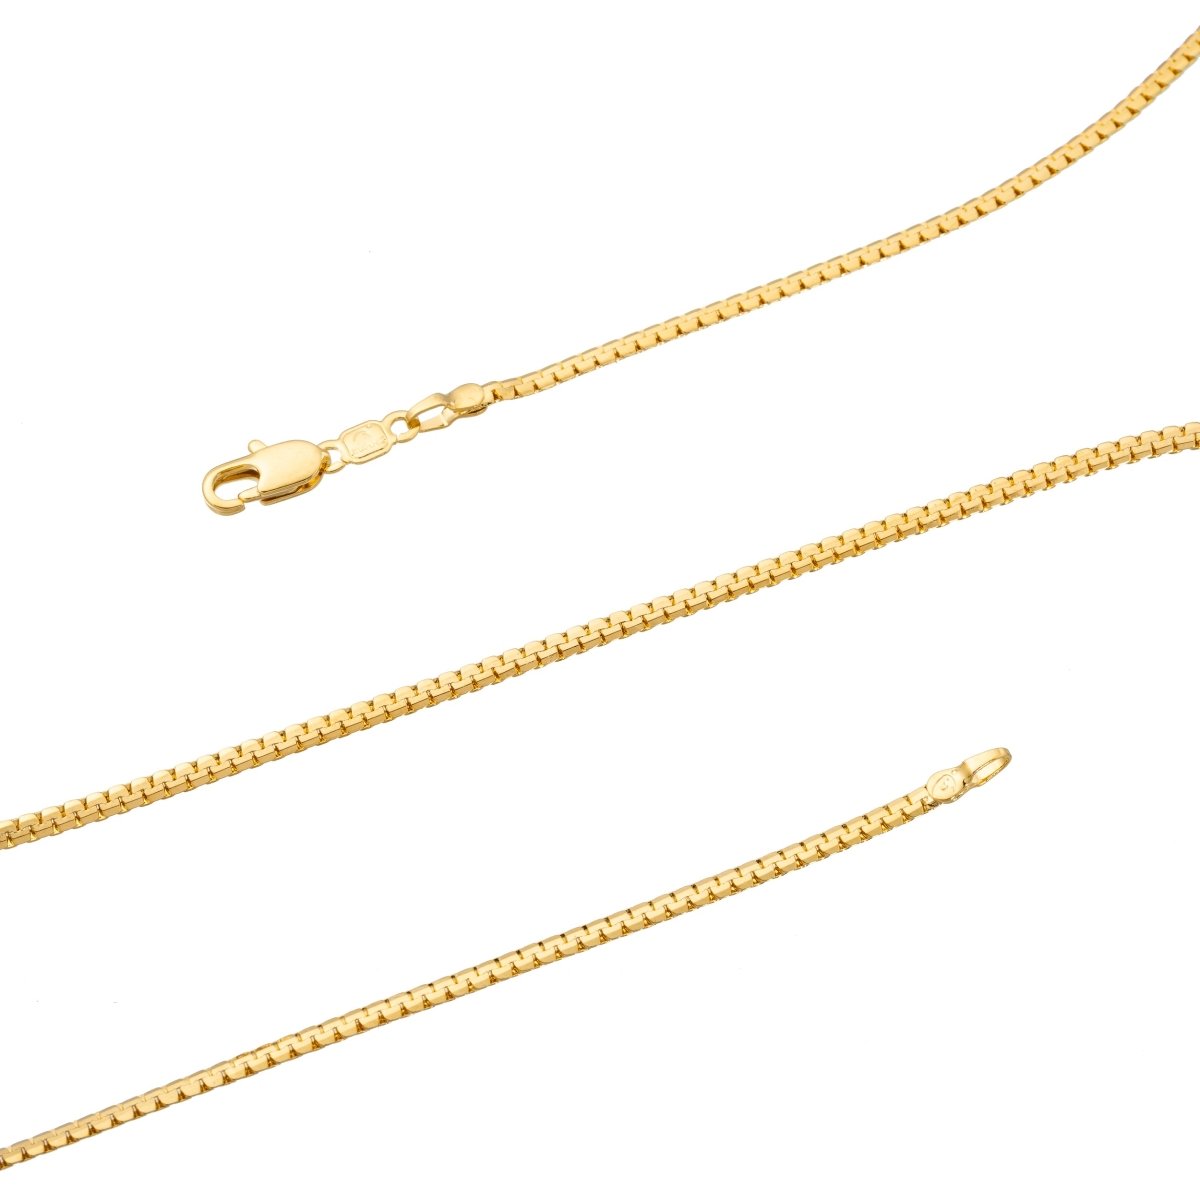 19.5 inch Gold C link Chain Necklace, 18K Gold Plated Finished Necklace For Jewelry Making, Dainty 1.7mm Cable Necklace w/ Lobster Clasps | CN-279 Clearance Pricing - DLUXCA